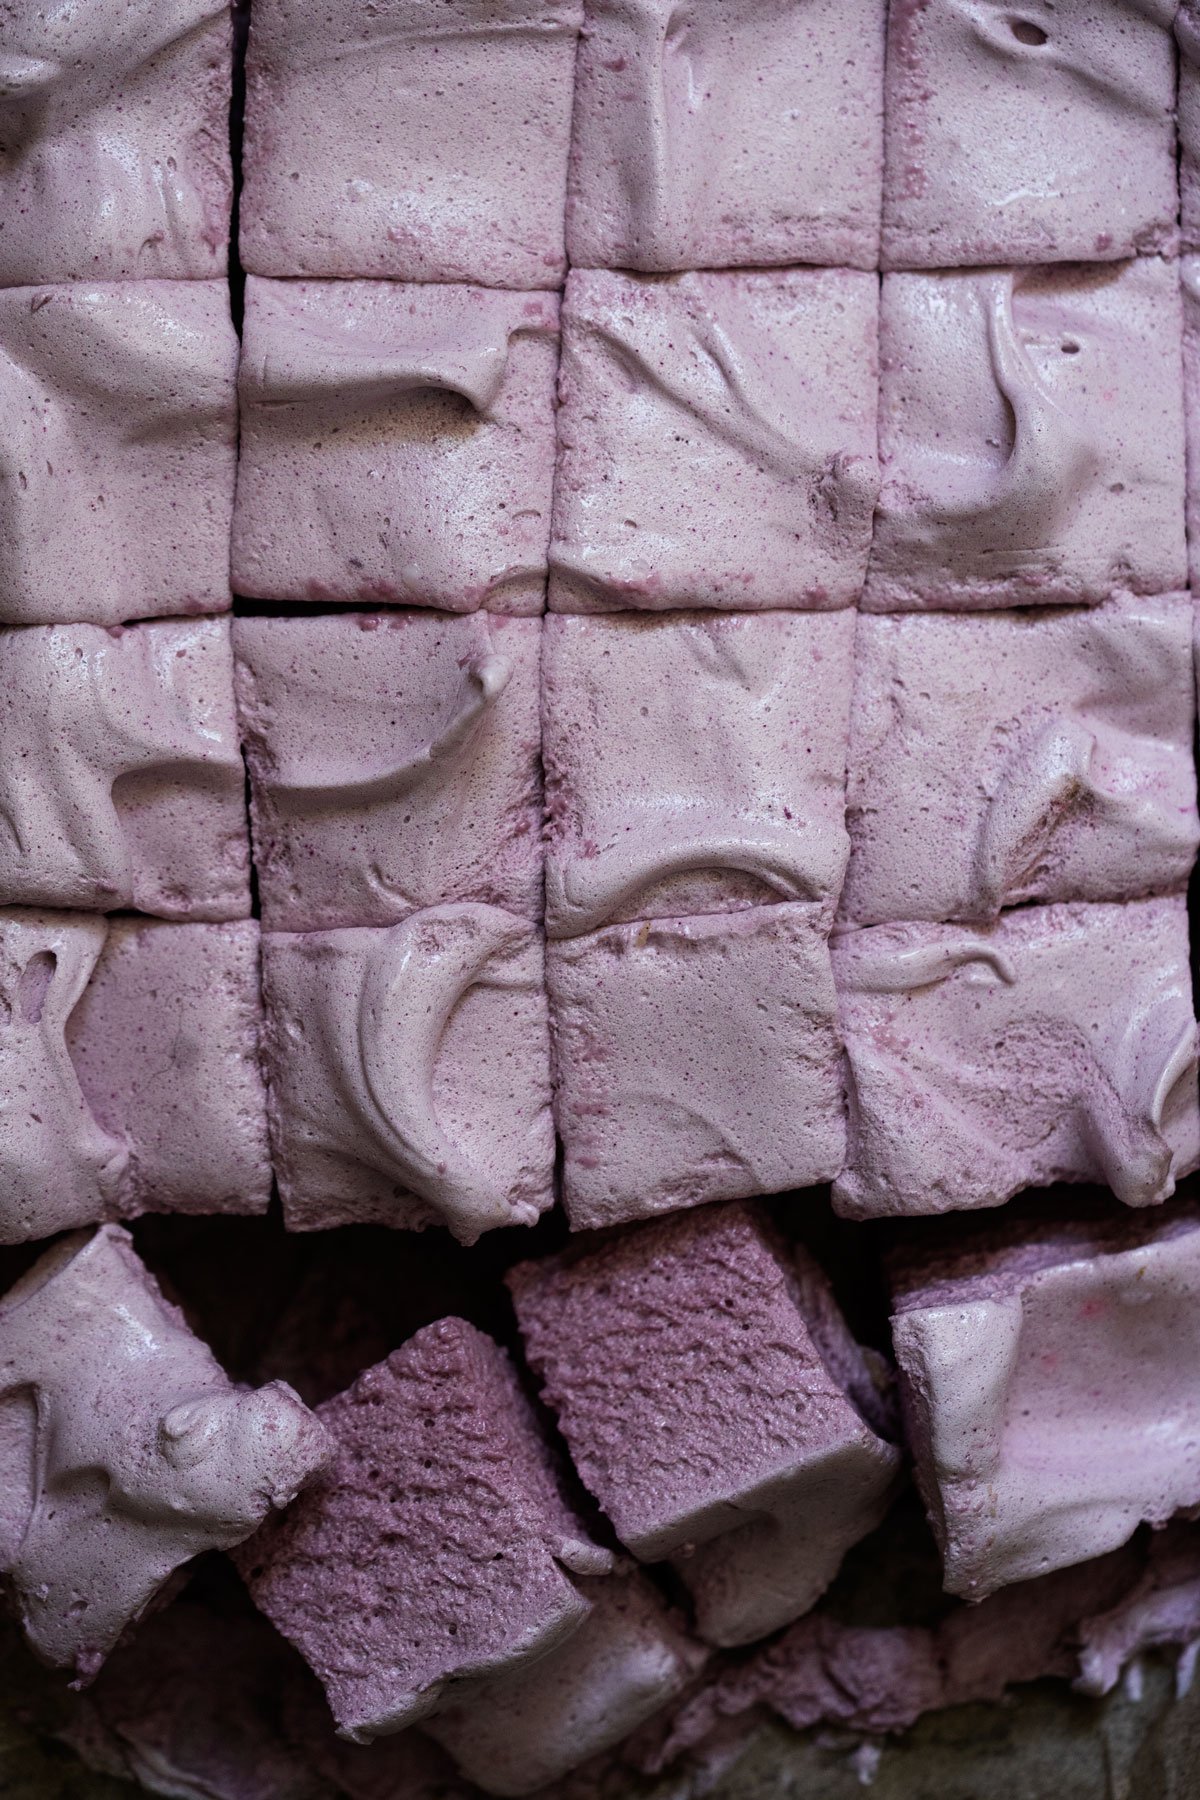 Freshly sliced maple syrup marshmallows with grape juice showing their fluffy texture and purple hue